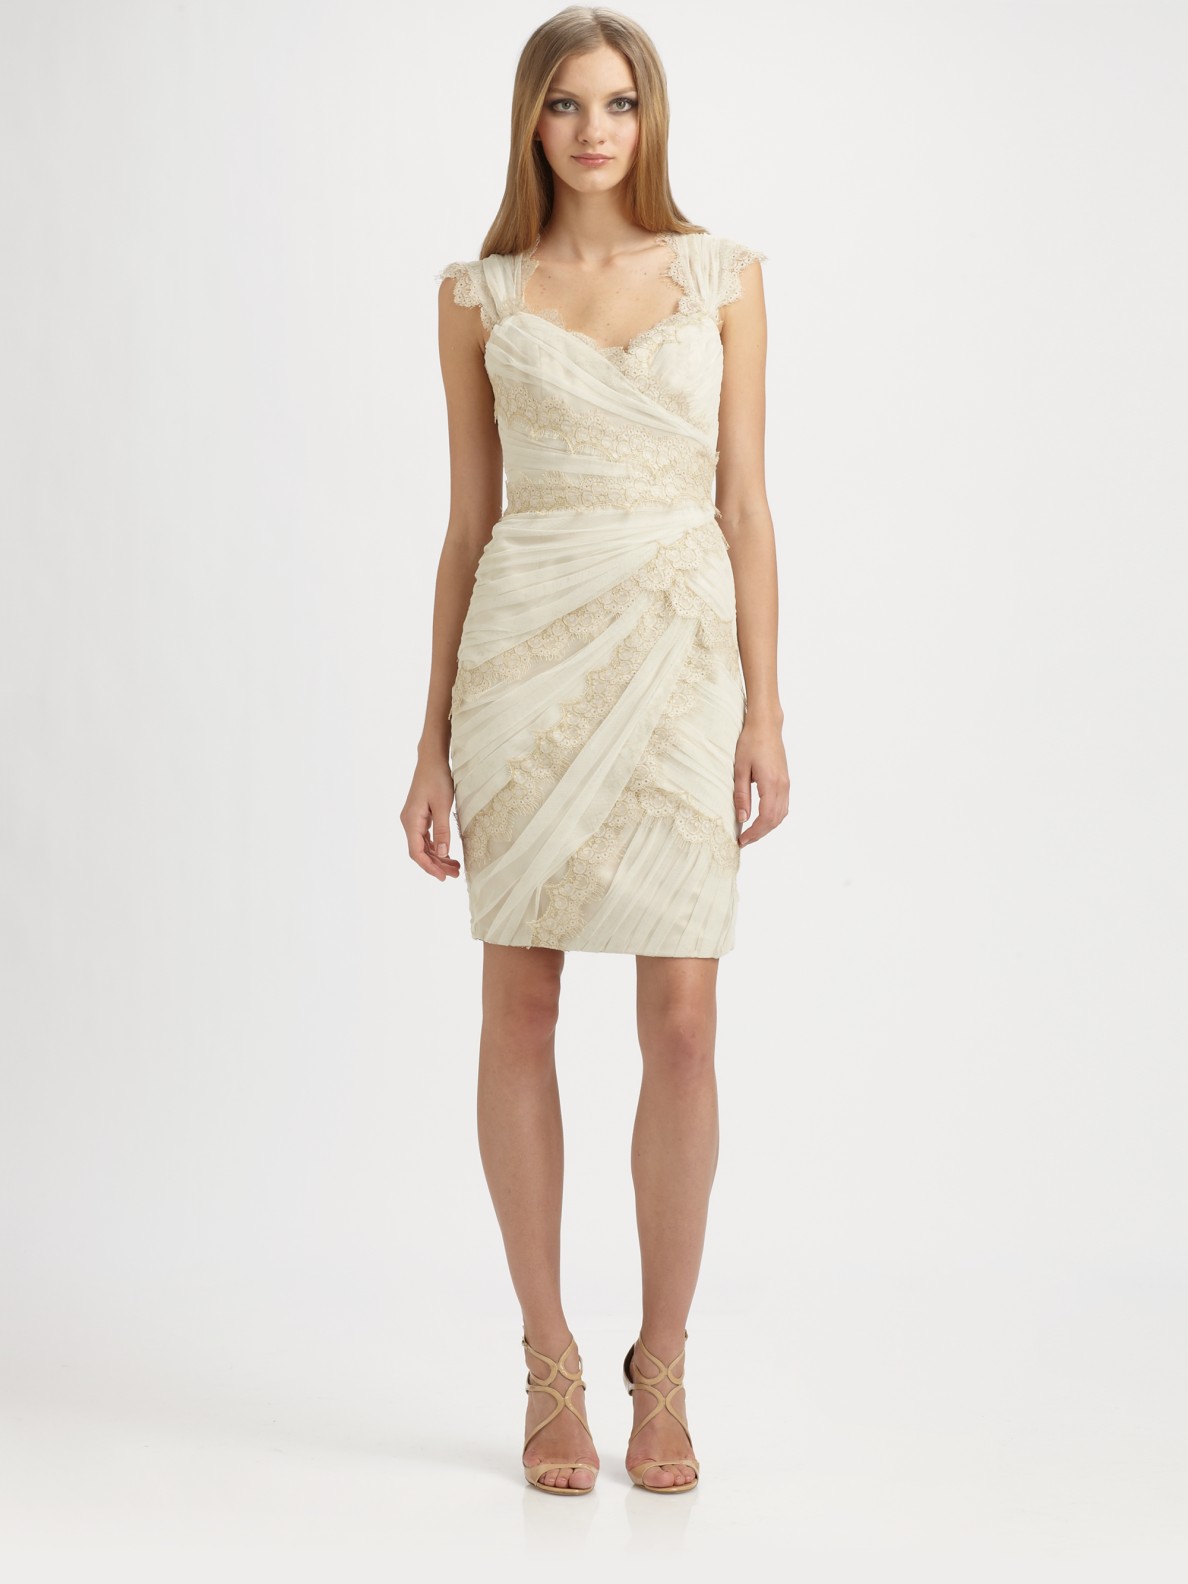 Lyst - Ml monique lhuillier Lacetrimmed Tulle Dress in Natural